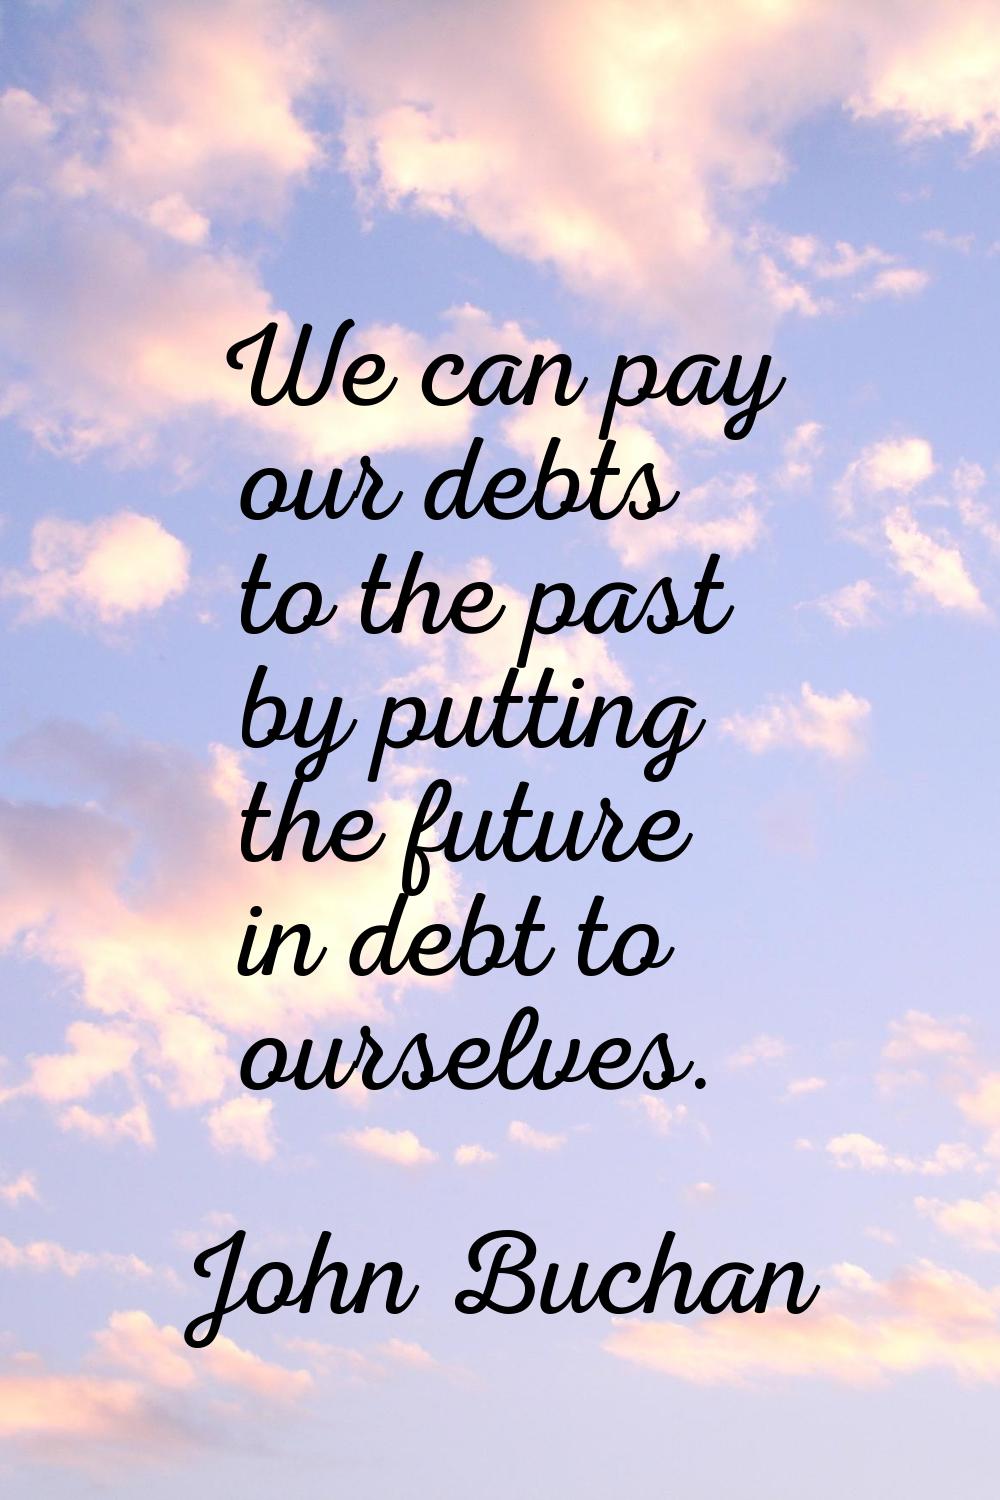 We can pay our debts to the past by putting the future in debt to ourselves.